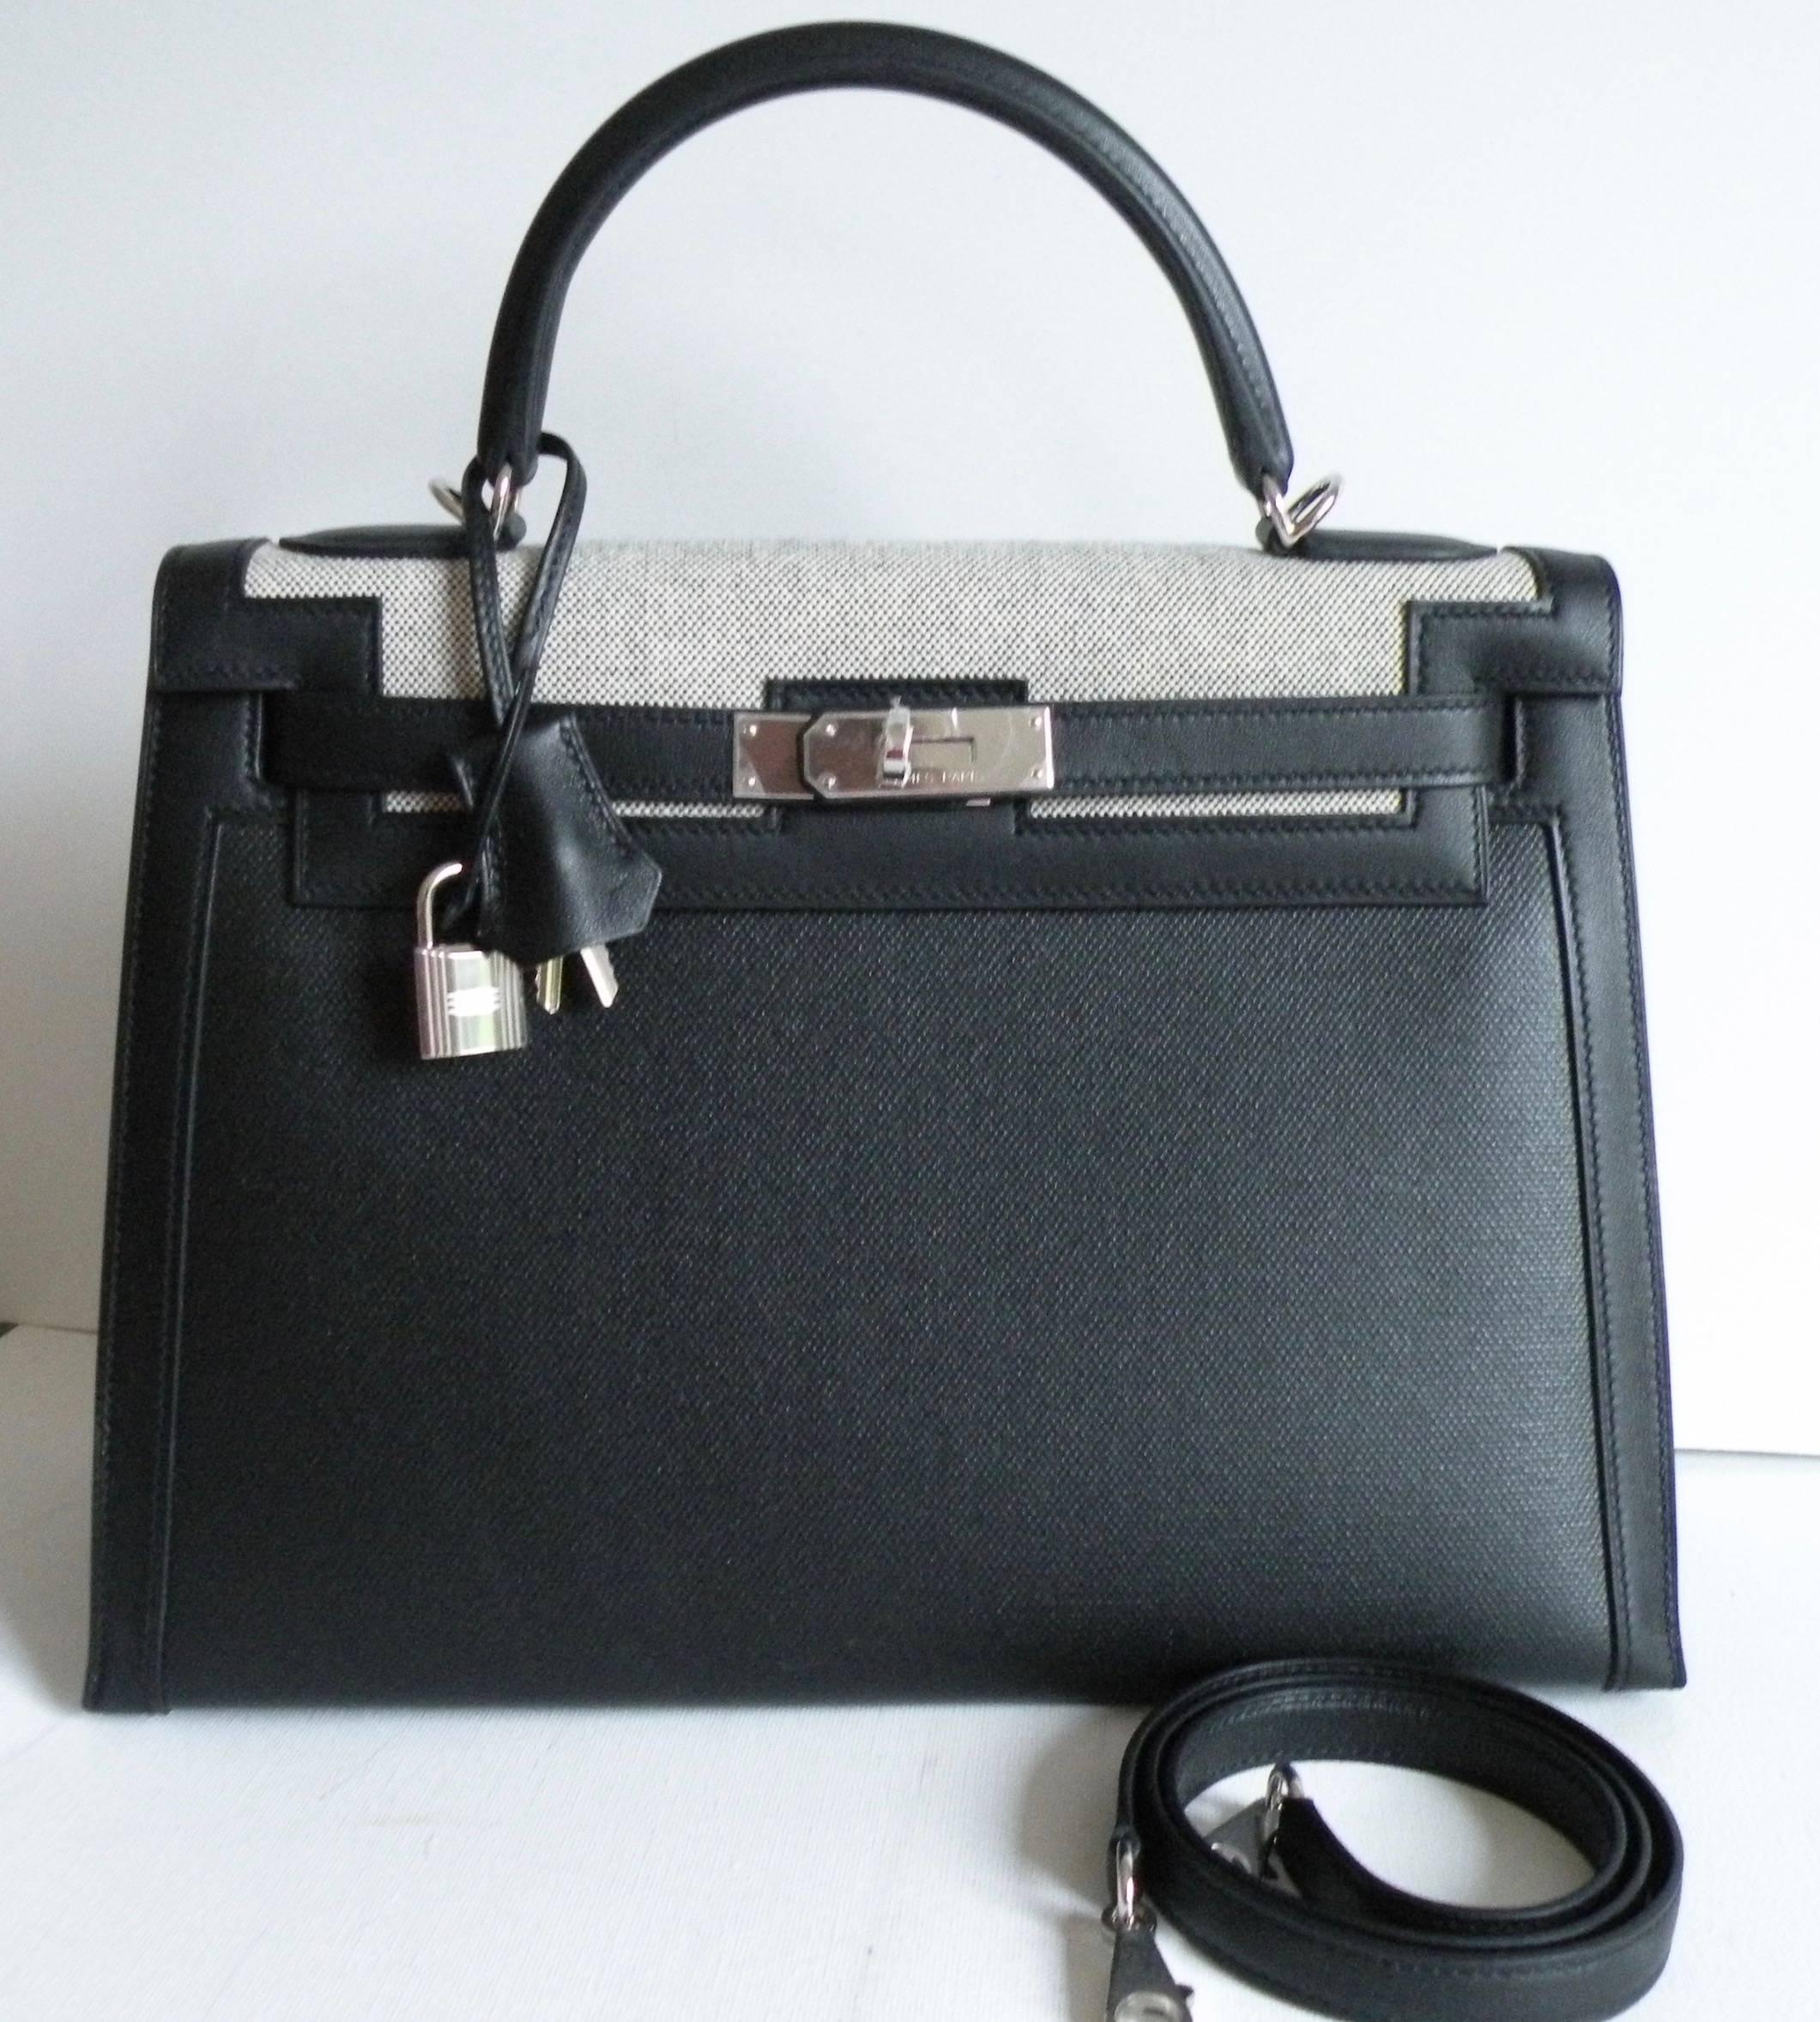 Hermes Limited Edition Collectors Kelly Bag Rare FindHermès
32cm Sellier Kelly Bag
Sellier Style which everyone wants
Hermes Limited Edition Bag 
This is a rare bag. It is a limited edition, and not many were released.  You probably will not see